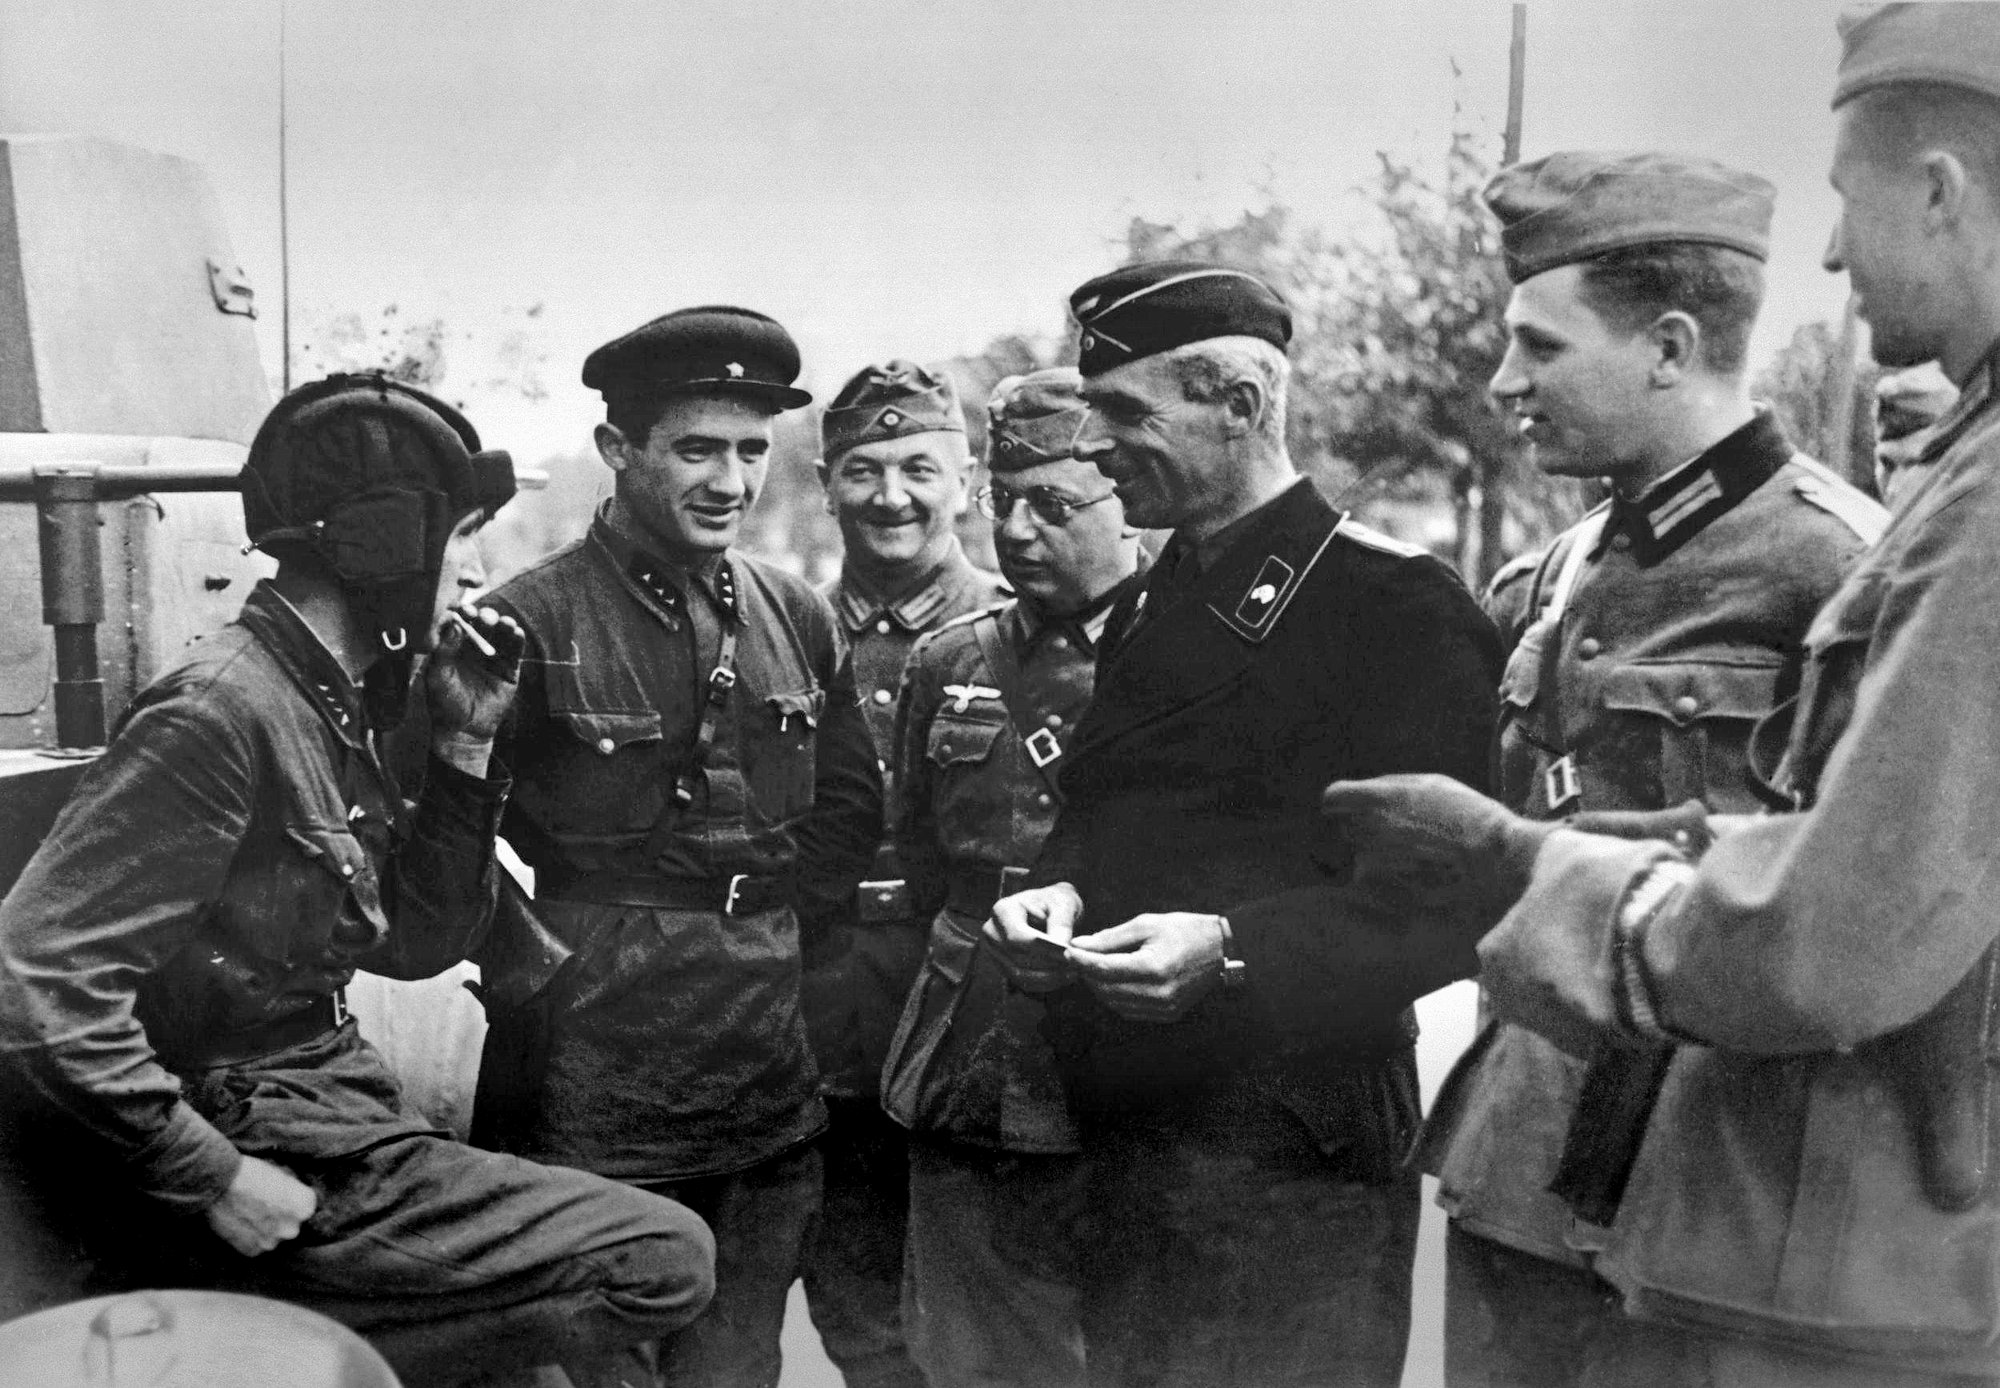 Soviet and German troops in a friendly discussion after suppressing Polish resistance in Brest, Sept. 18, 1939